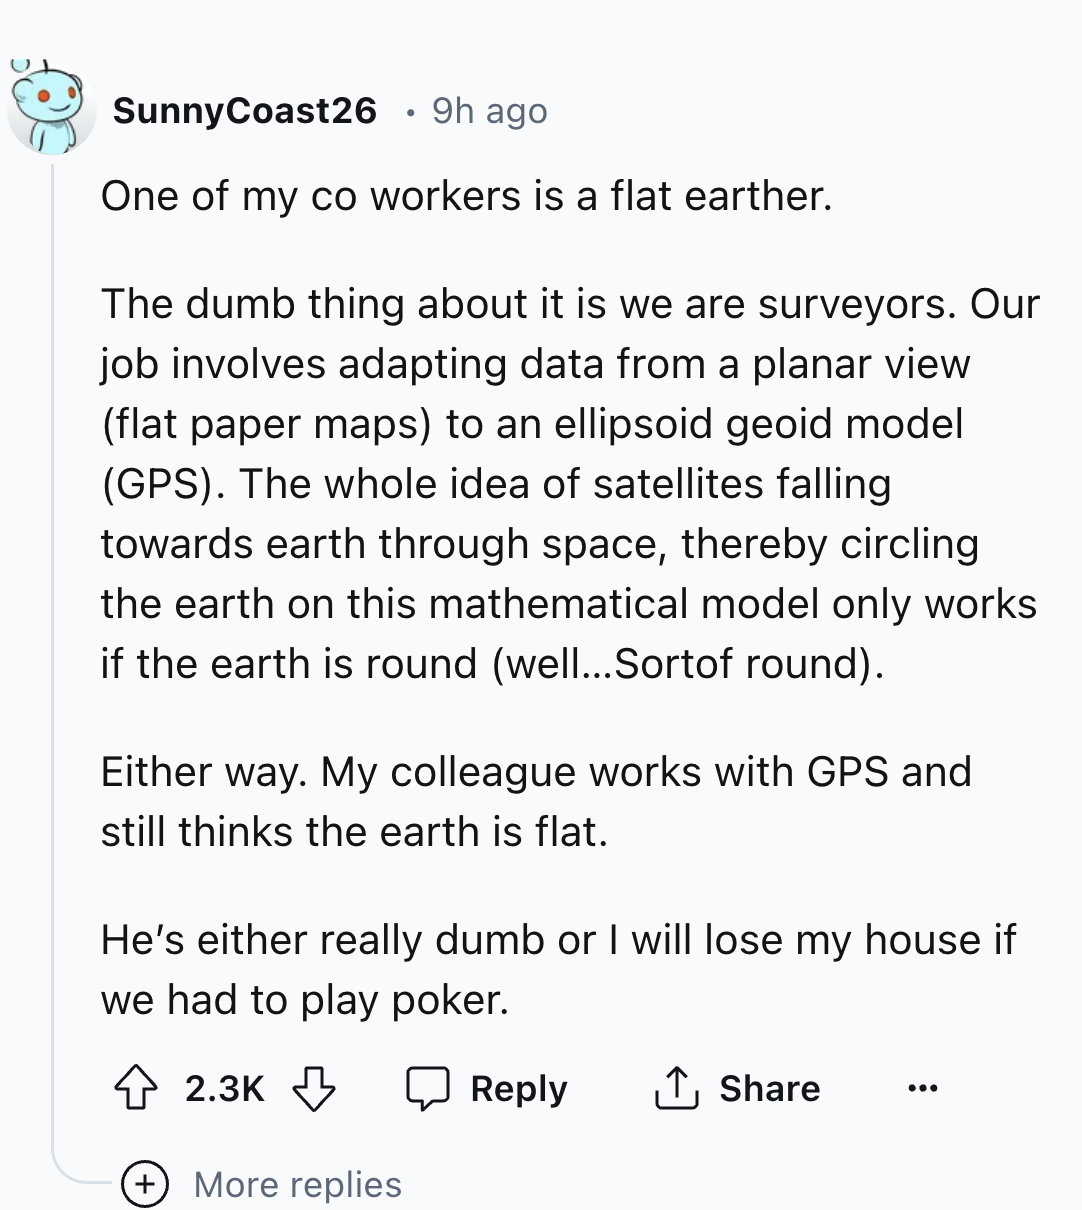 document - SunnyCoast26 9h ago One of my co workers is a flat earther. The dumb thing about it is we are surveyors. Our job involves adapting data from a planar view flat paper maps to an ellipsoid geoid model Gps. The whole idea of satellites falling tow